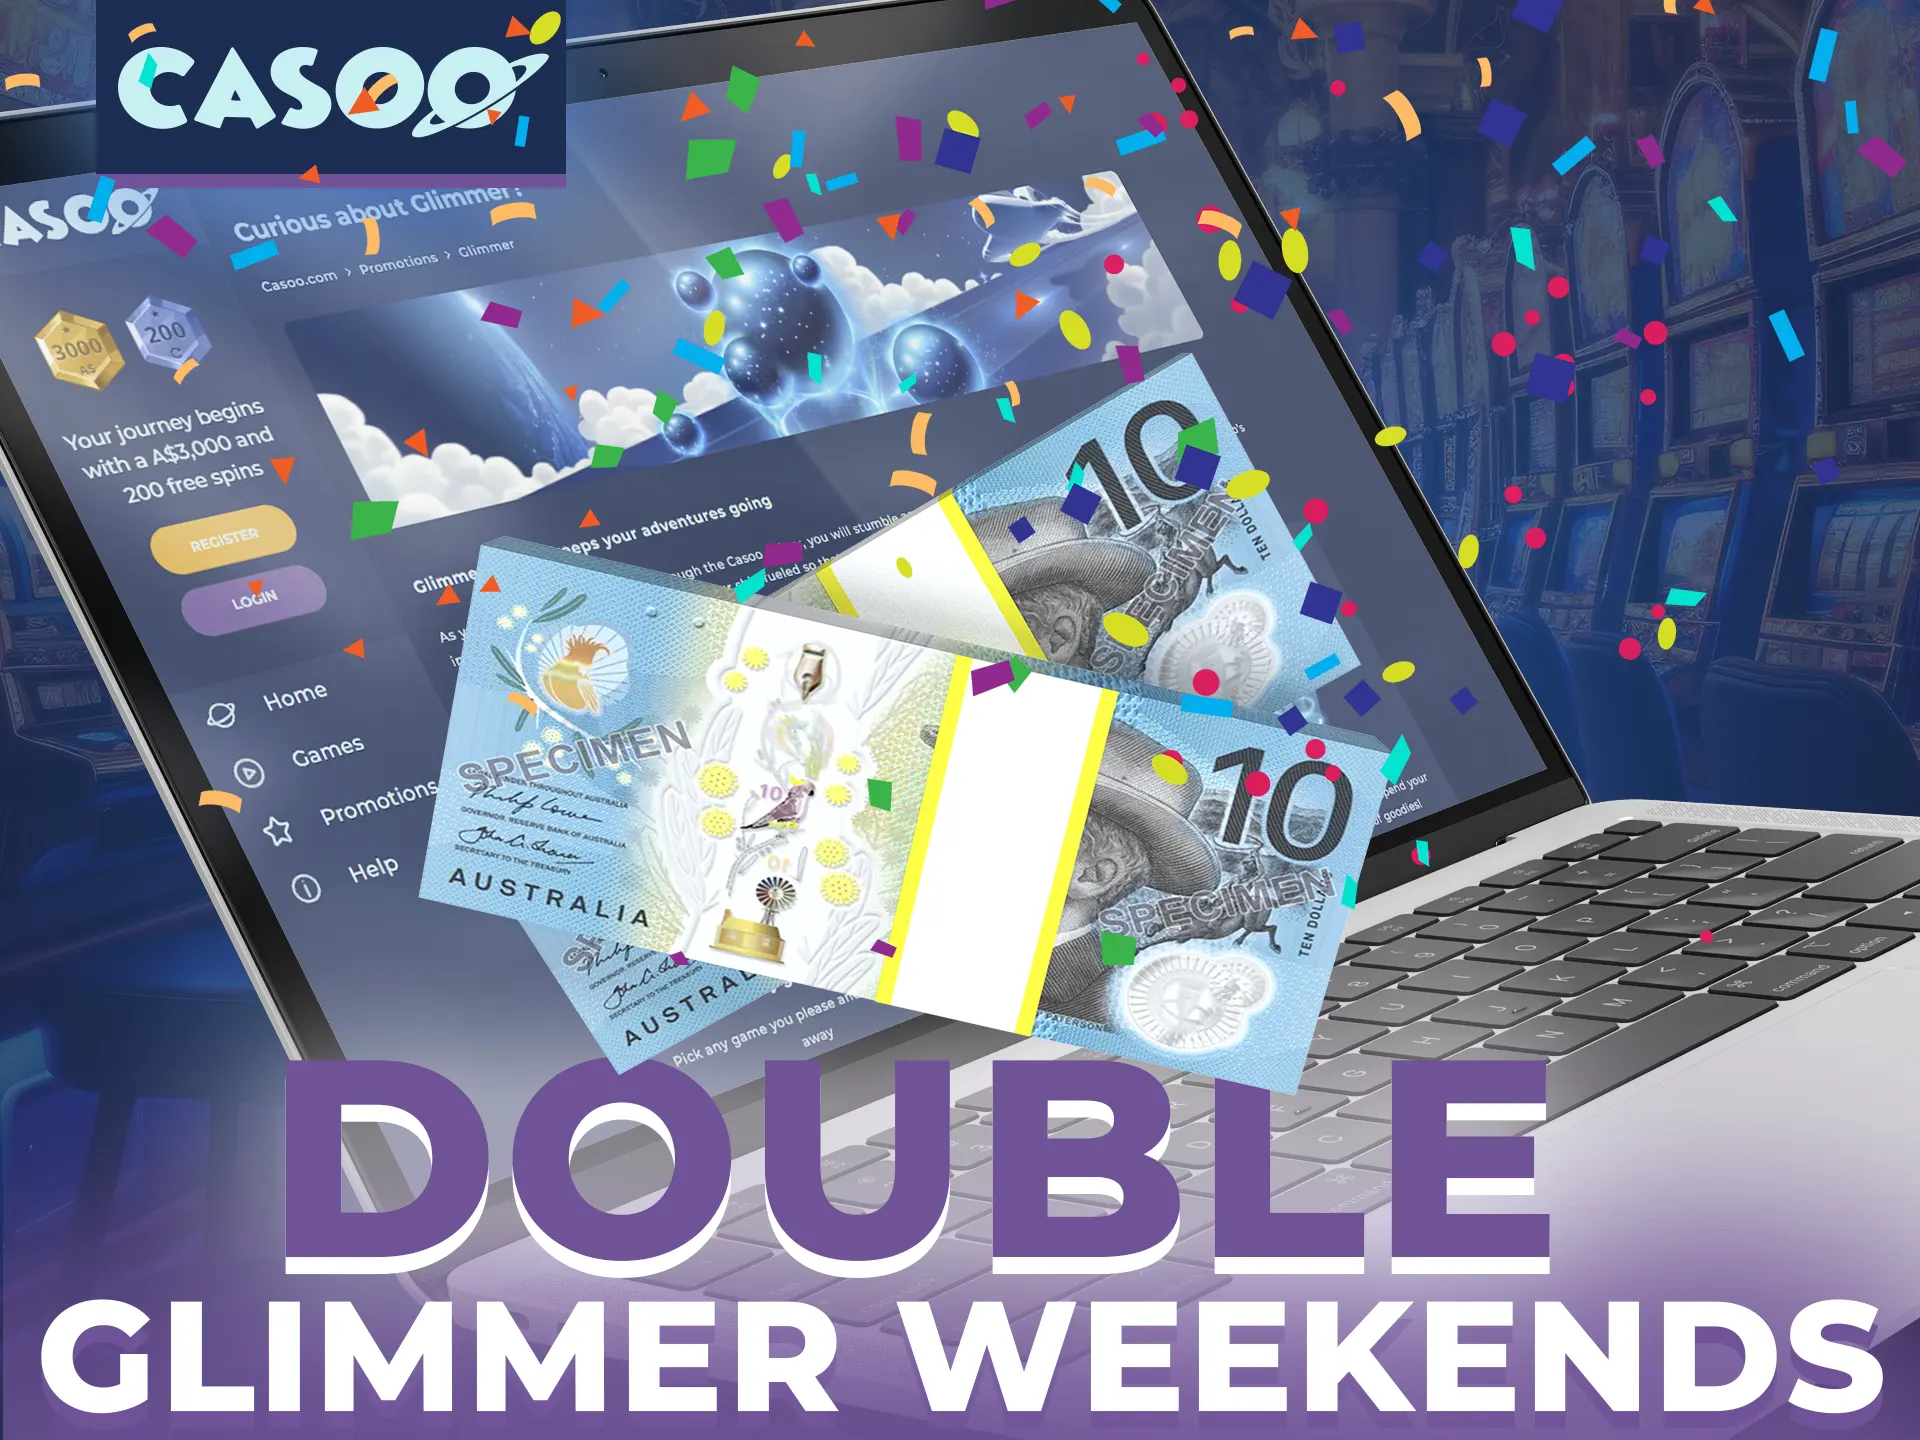 Get extra rewards with double glimmer weekends.